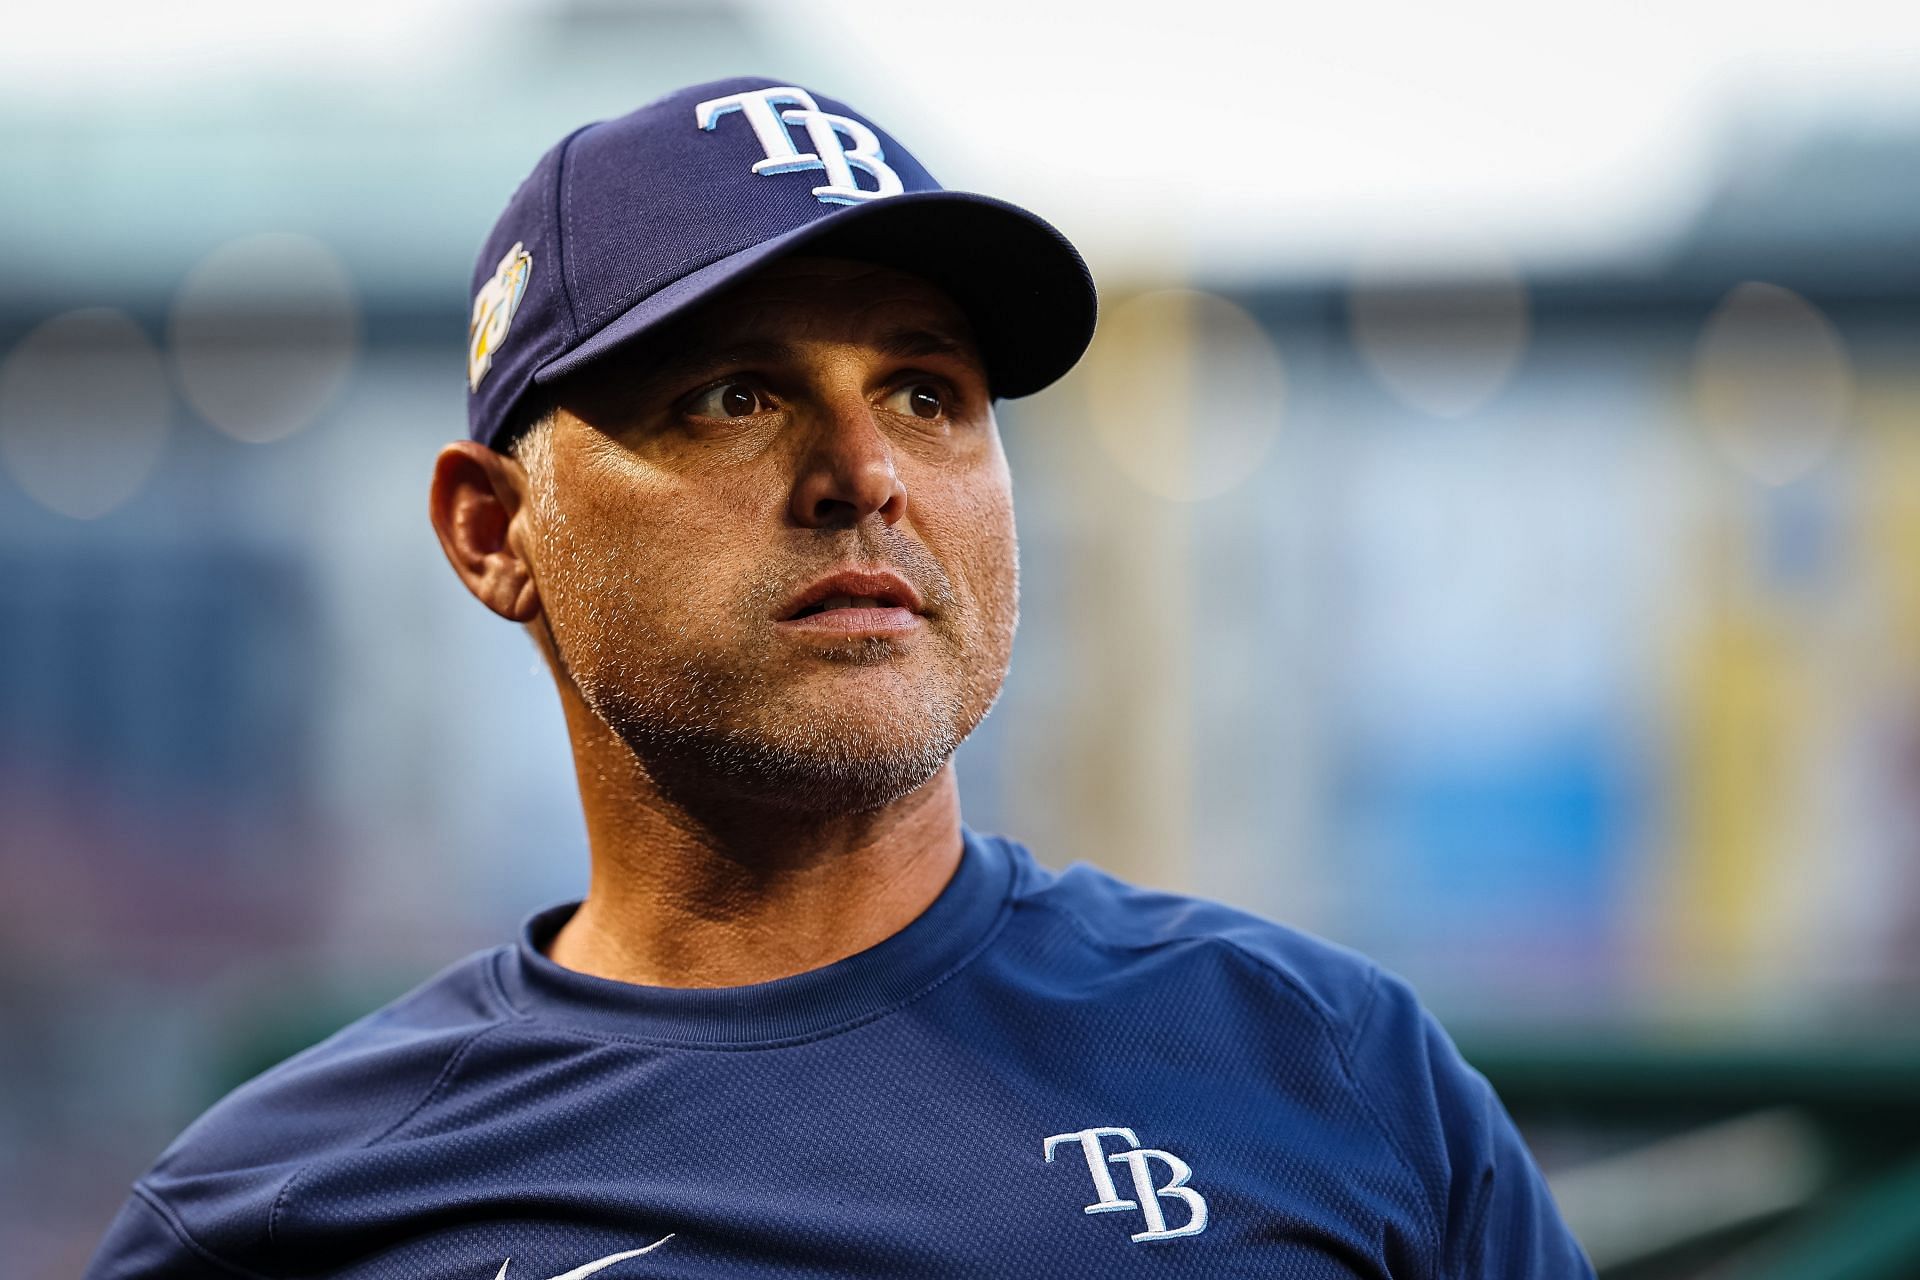 Tampa Bay Rays manager stands by dramatic ejection "I said I didn’t